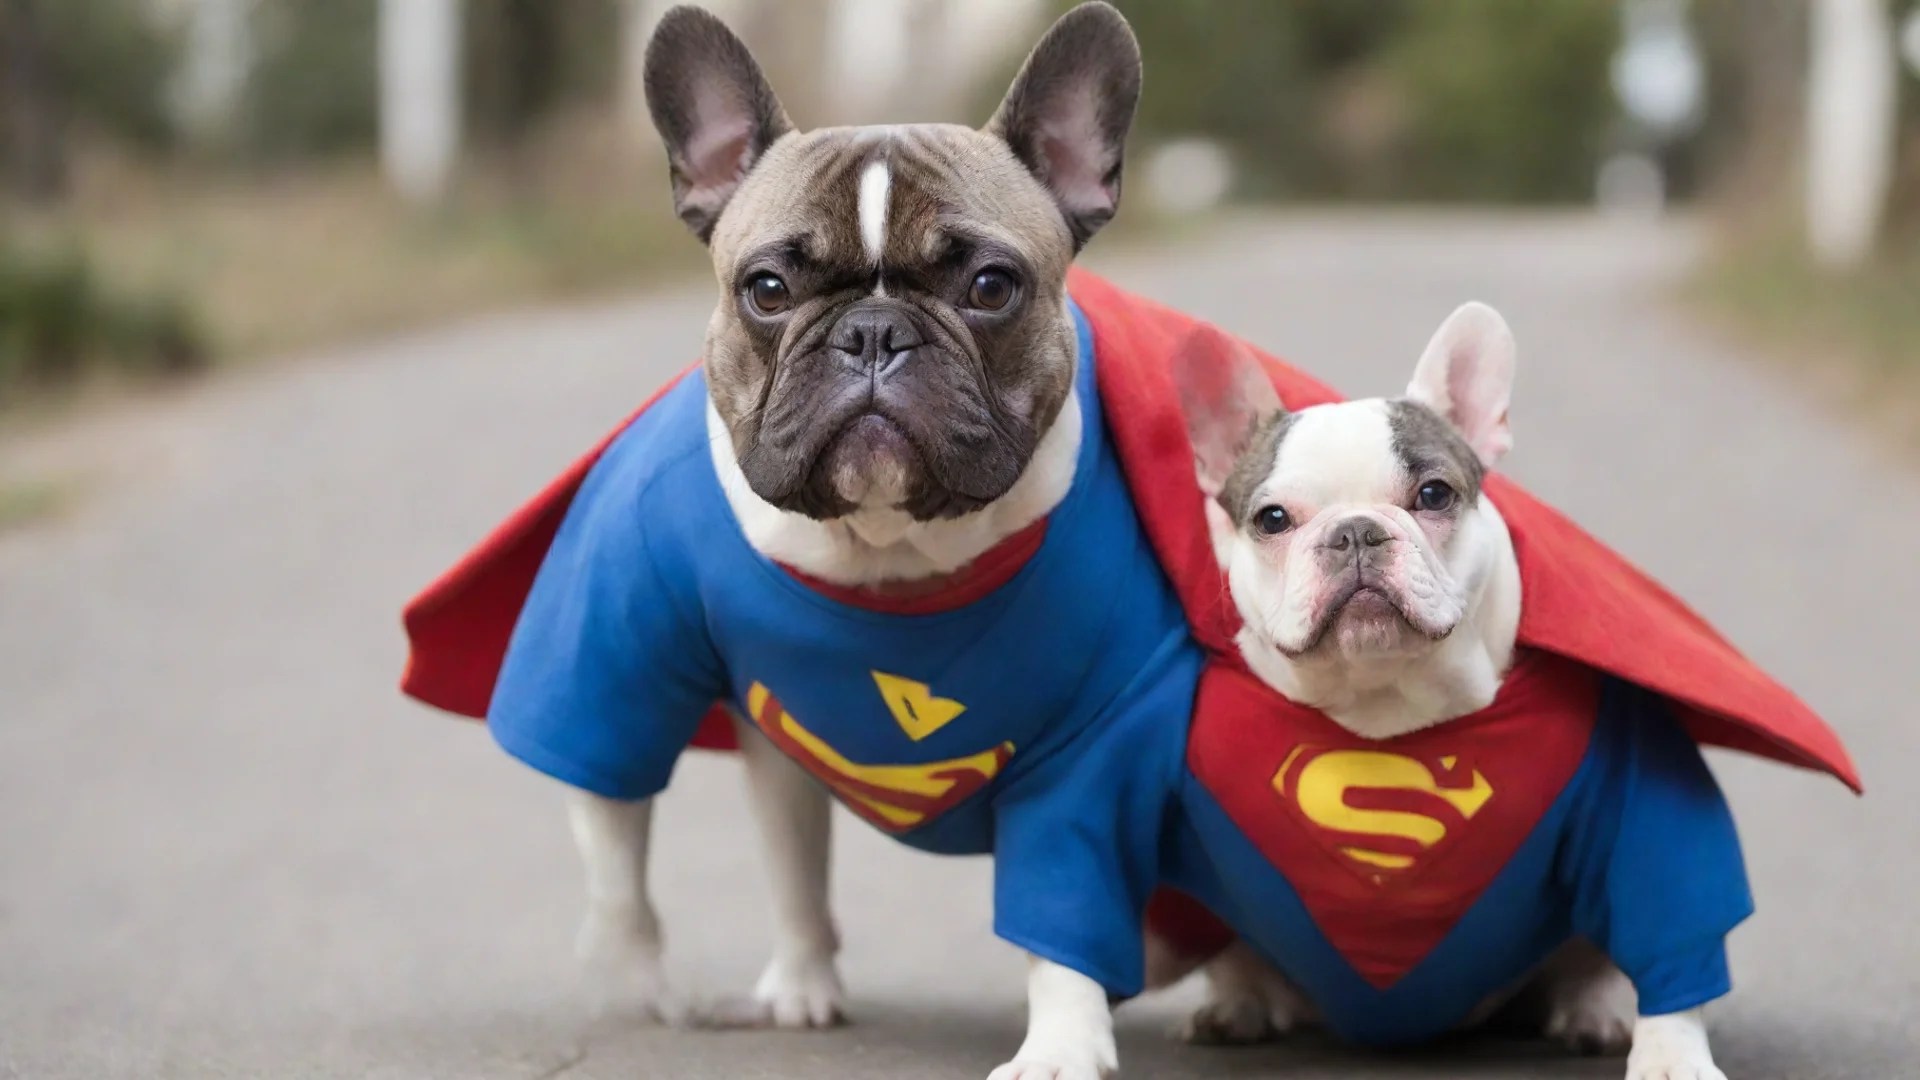 aiamazing french bulldog with a superman costume awesome portrait 2 wide